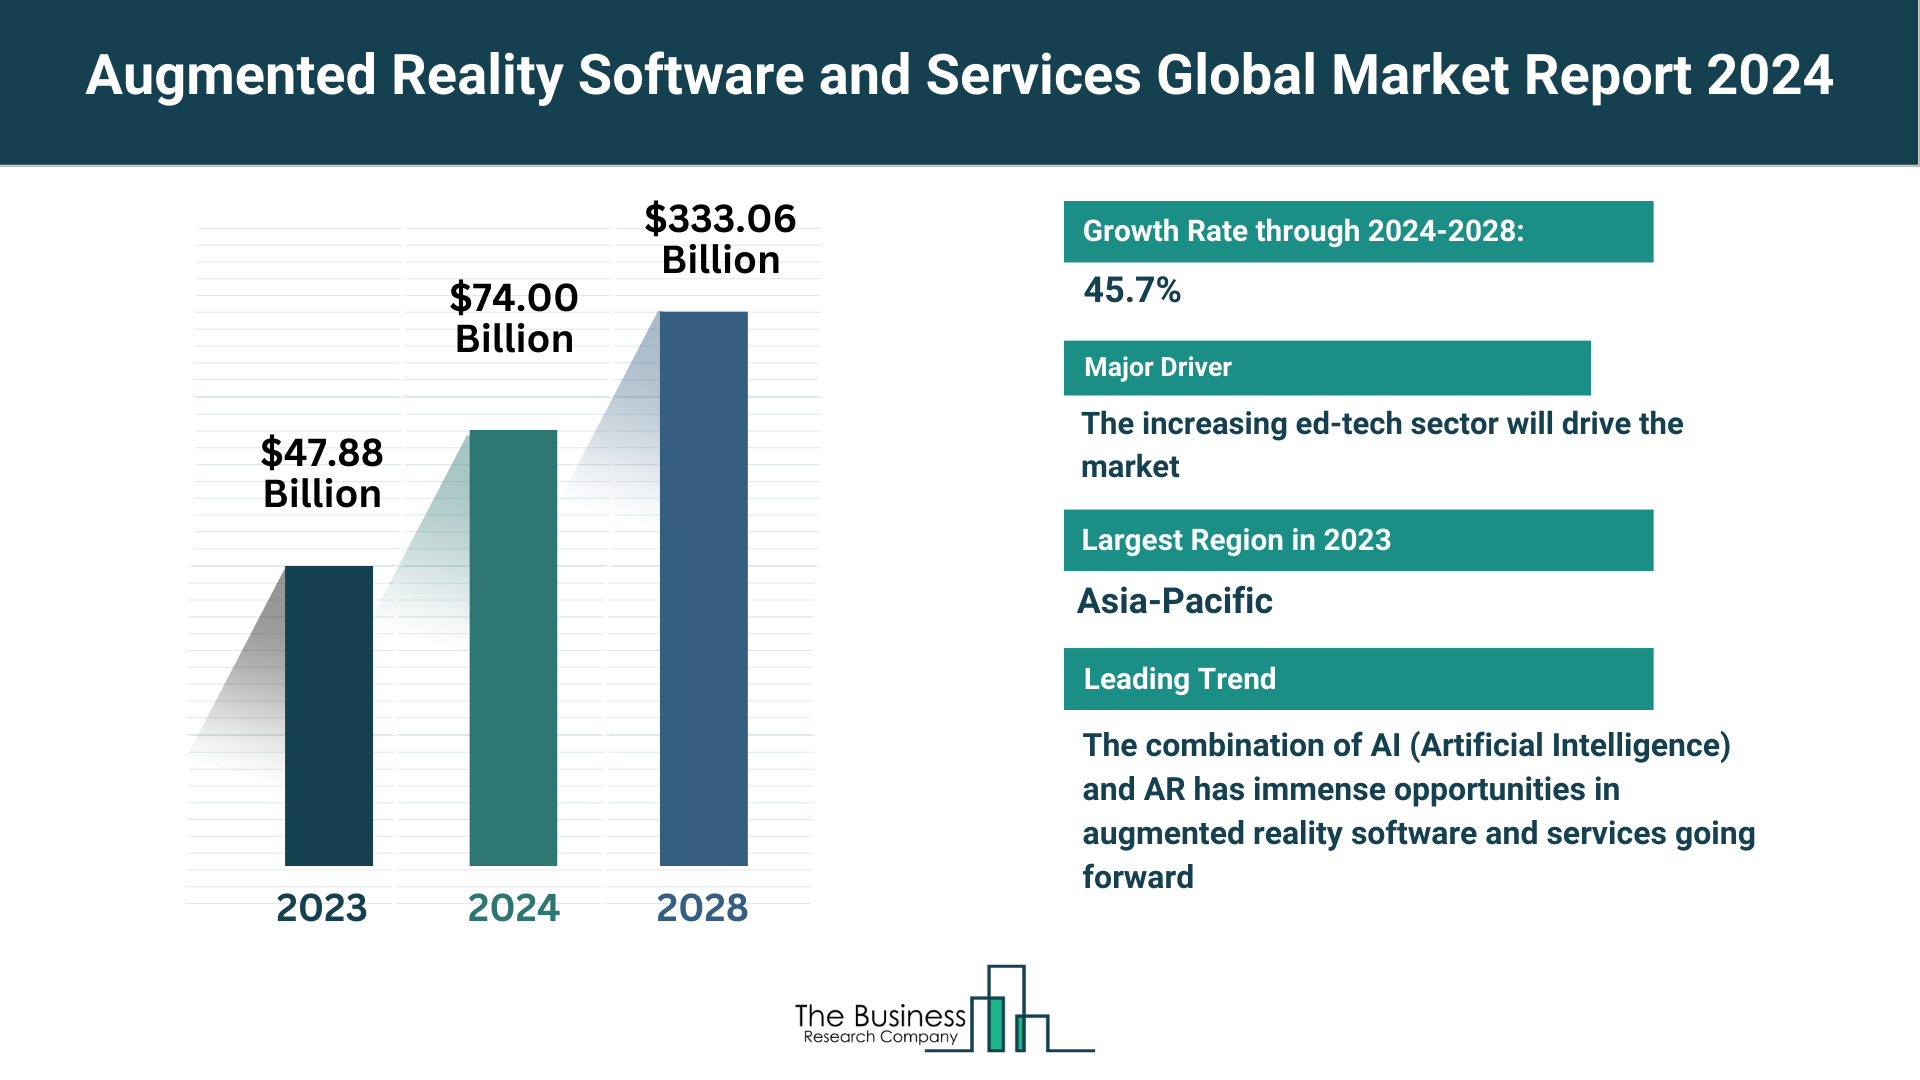 Global Augmented Reality Software and Services Market